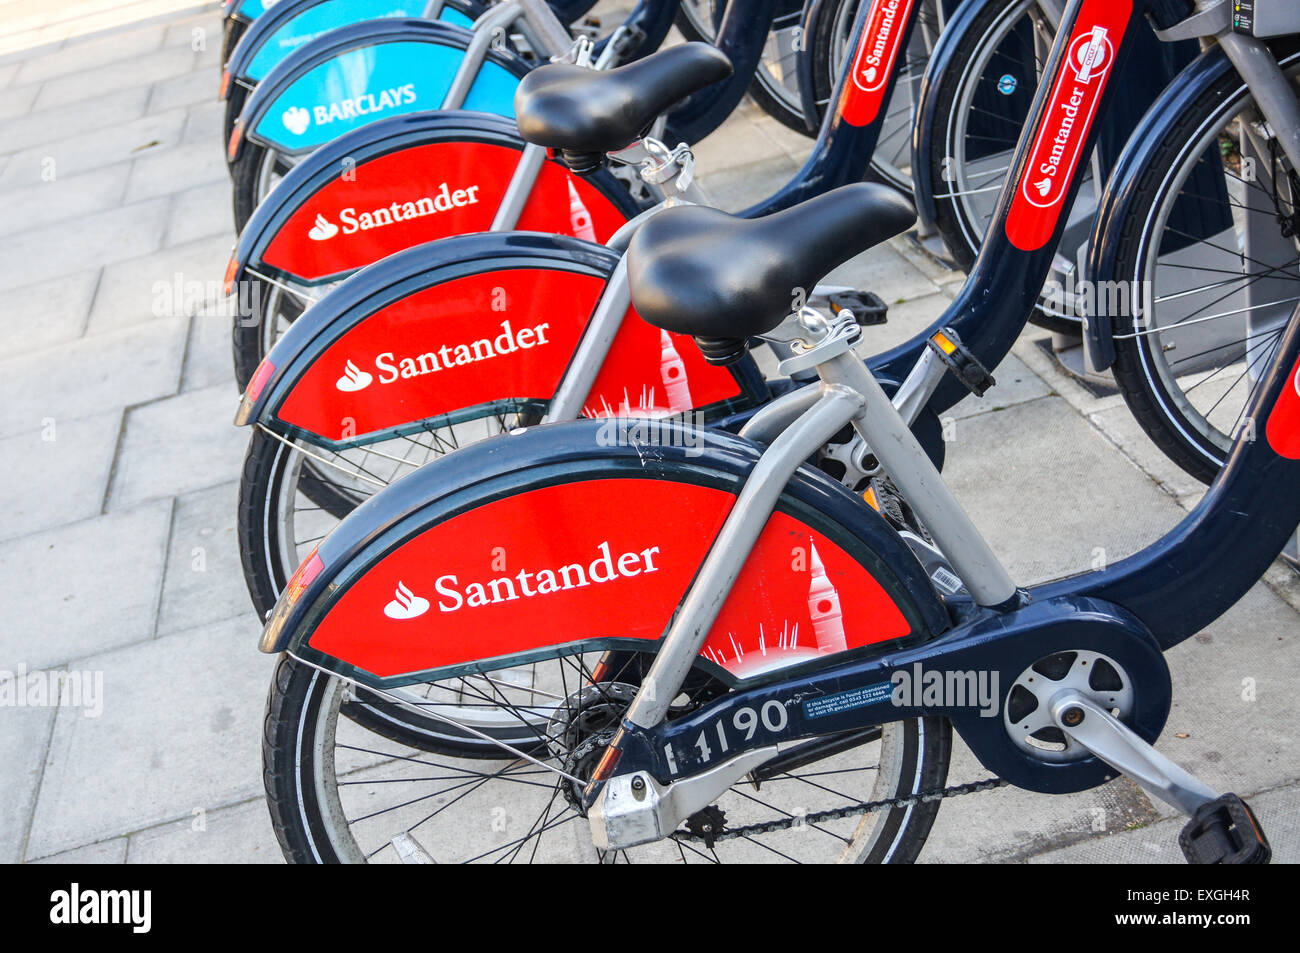 'Boris bikes' urban cycle rental scheme bicycles at a rental station in Stockwell, London, England Stock Photo